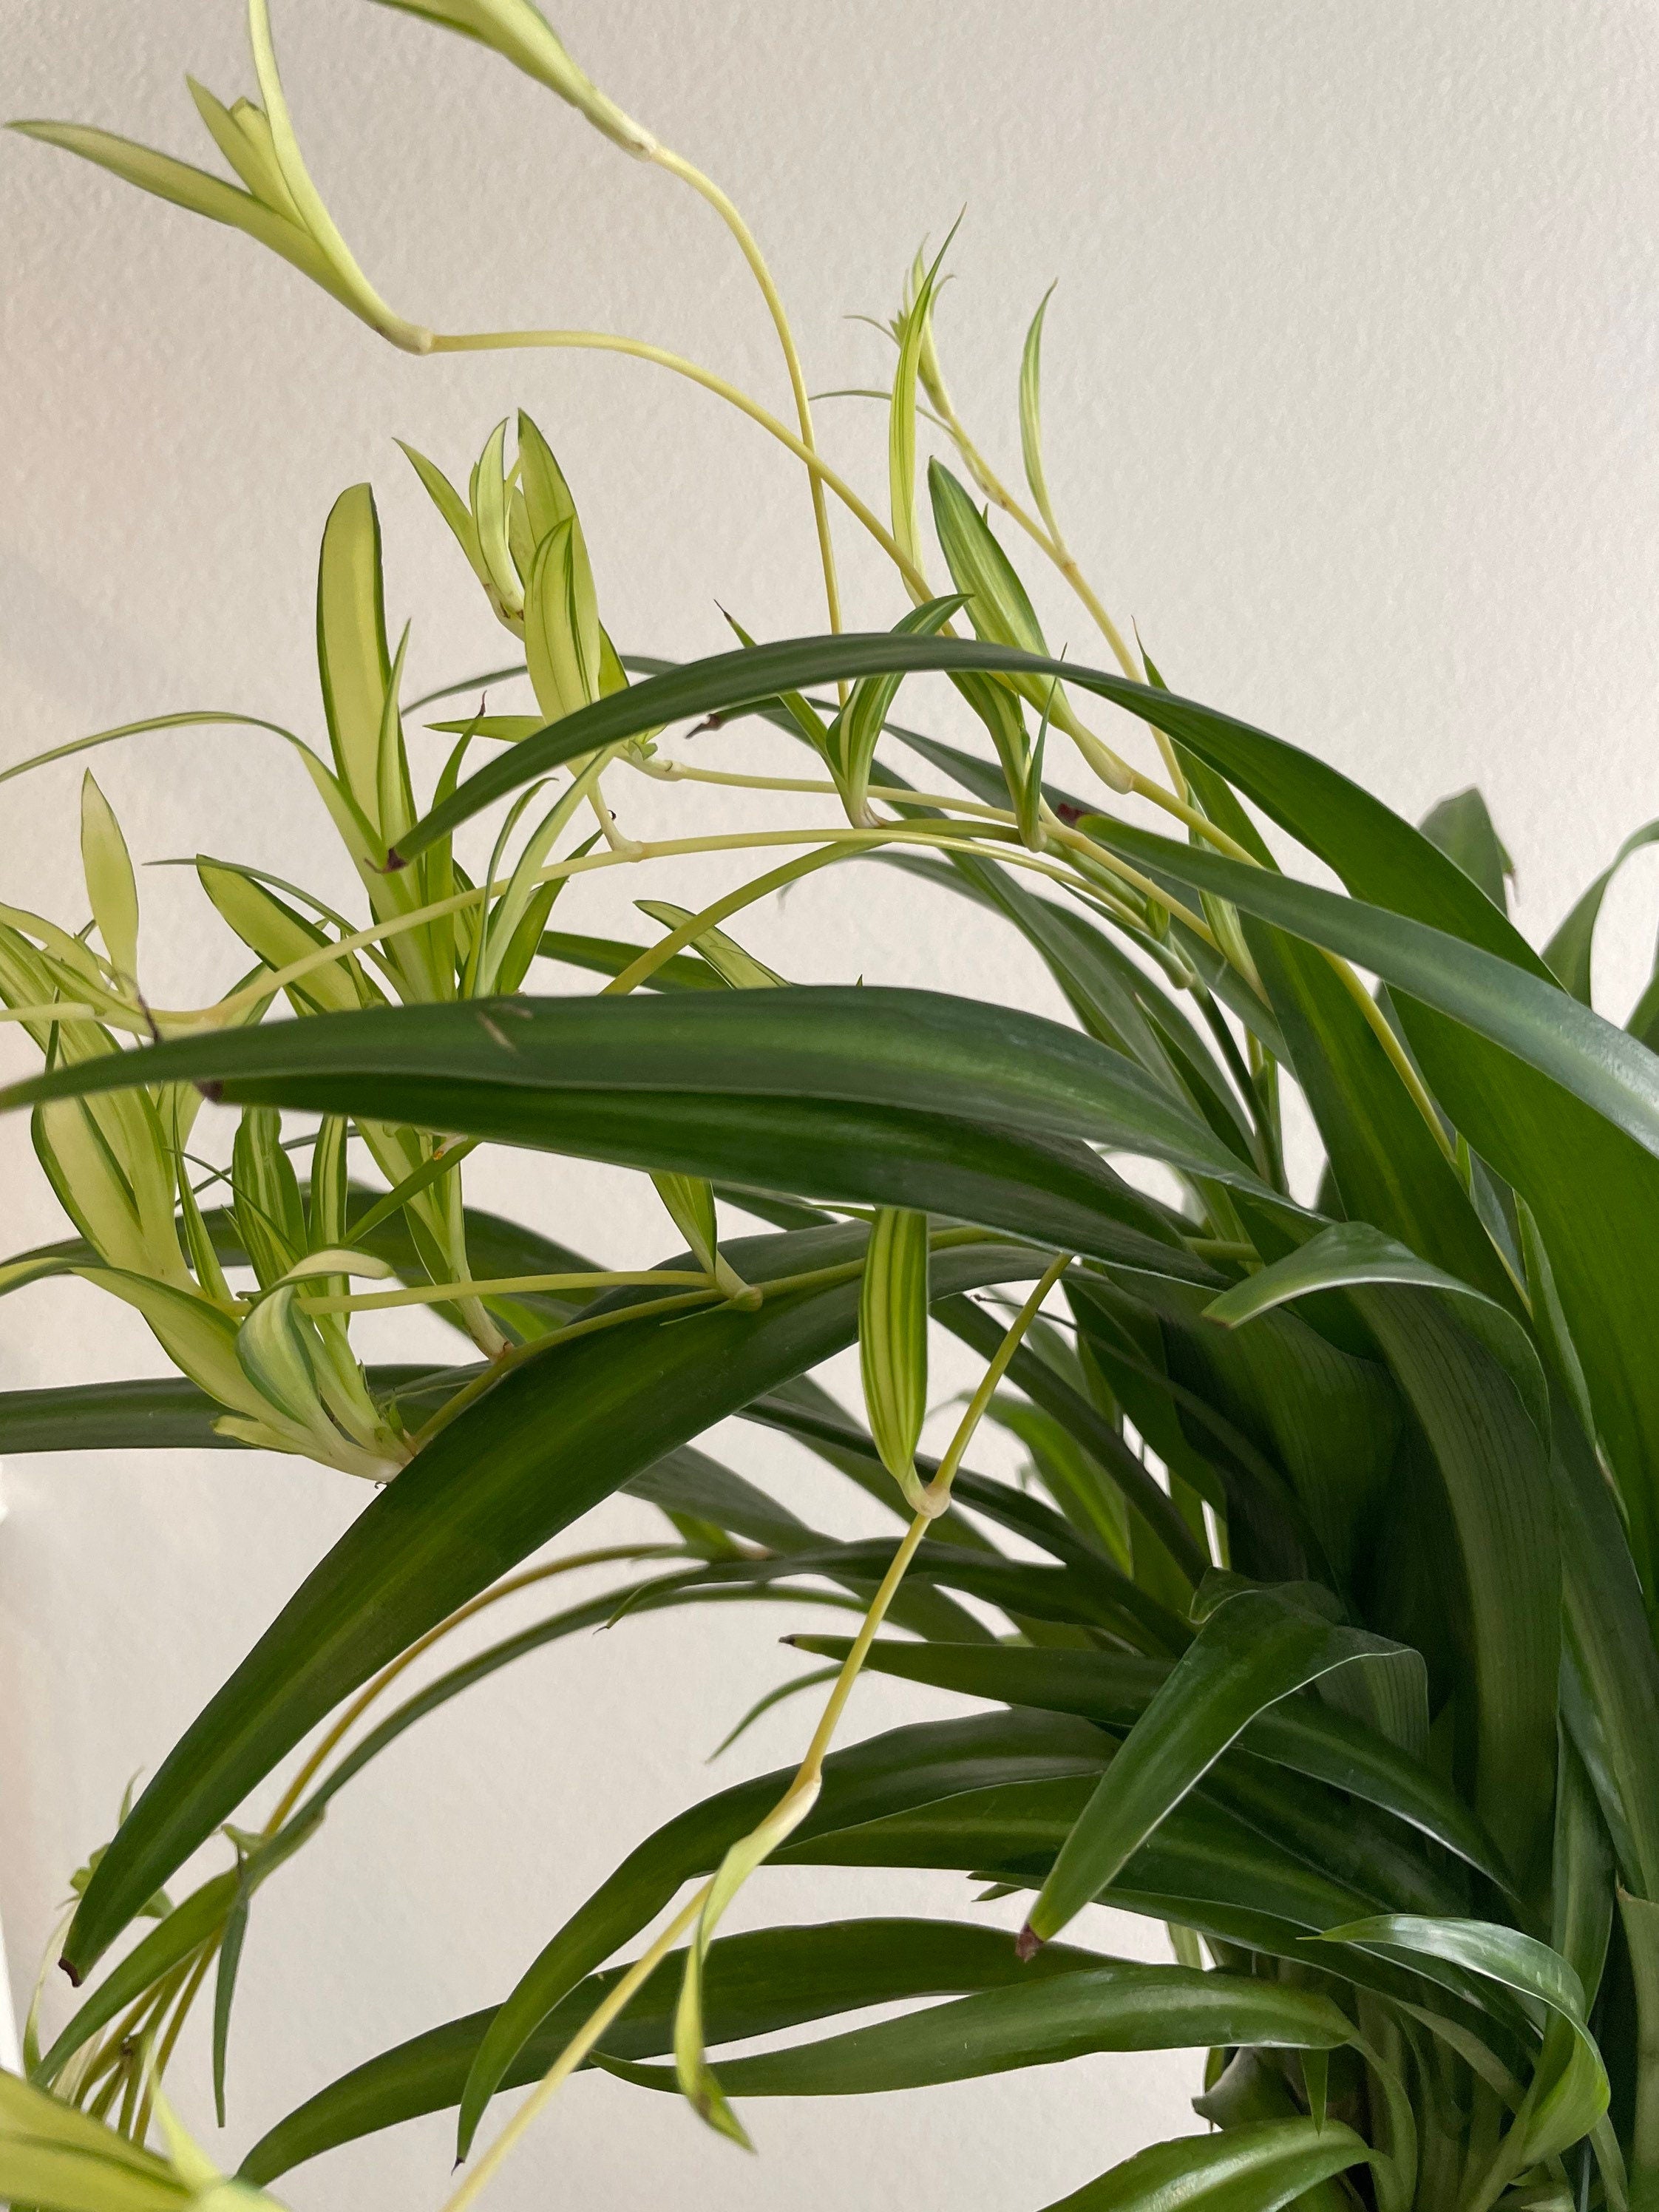 XL - 6 inch potted -green Spider plant with babies -Air Purifying Indoor Plant Chlorophytum -similar to photo not exact-